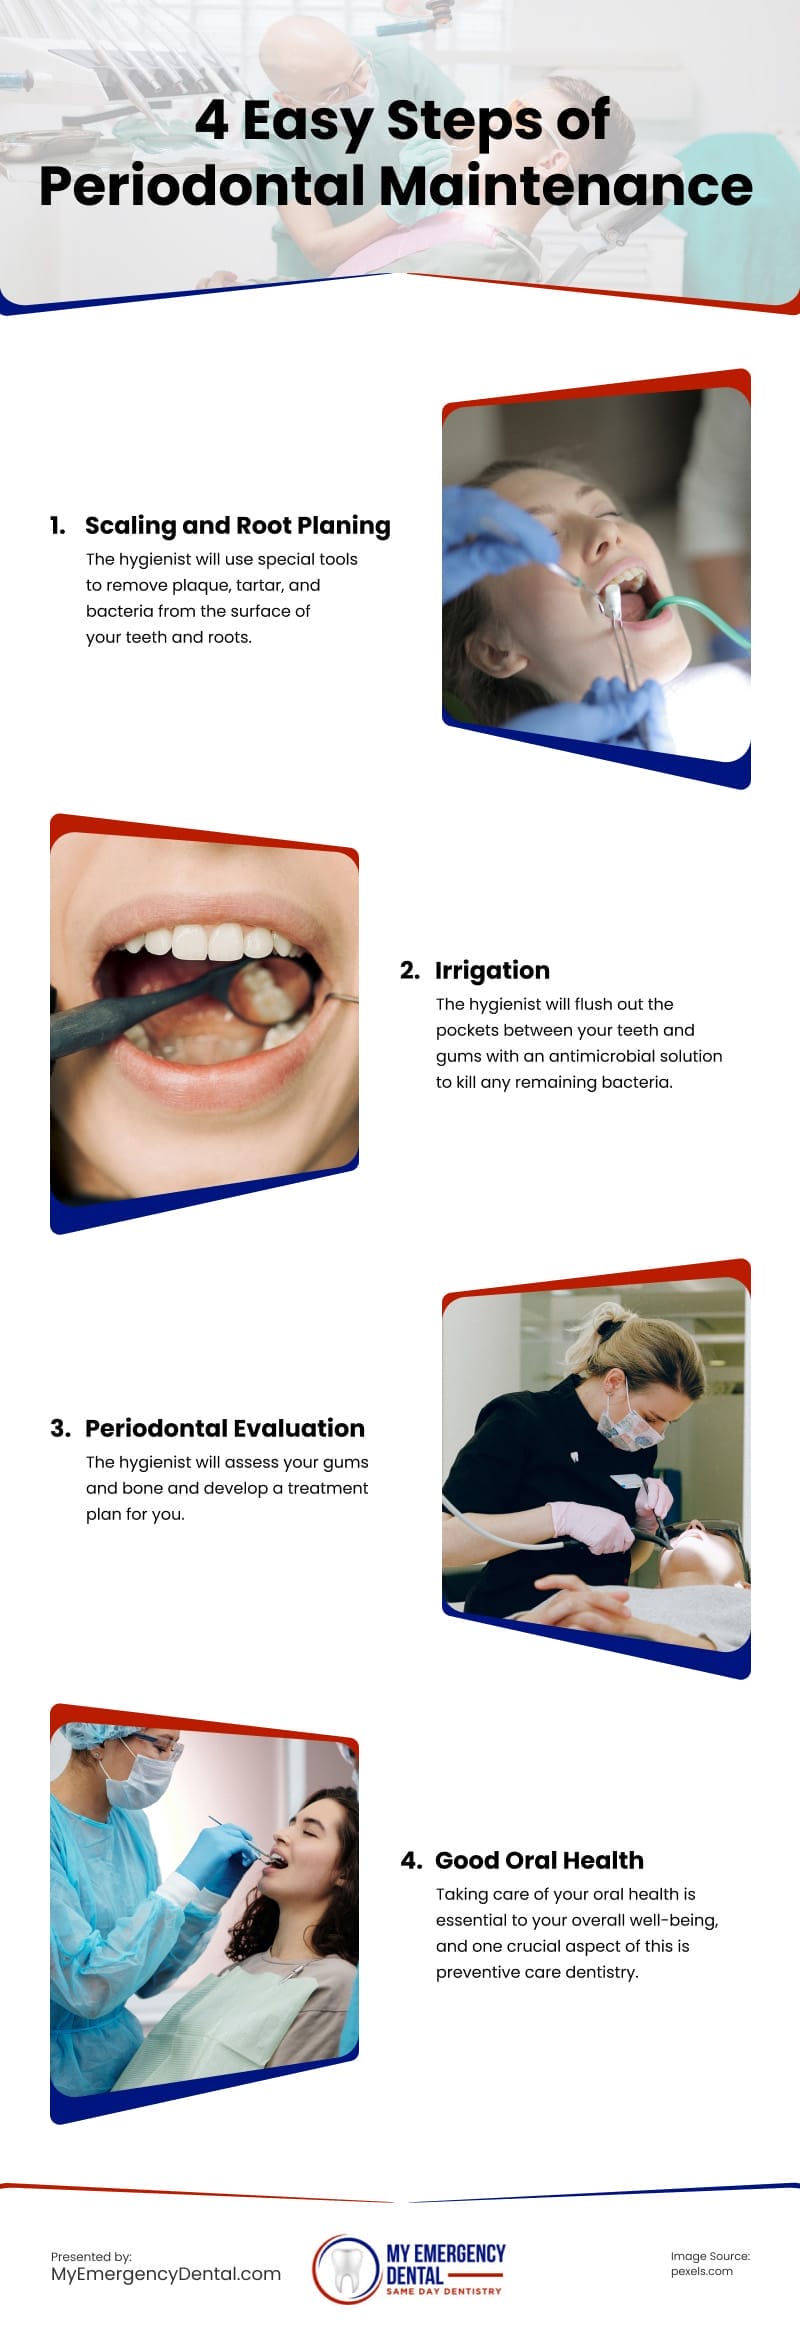 4 Easy Steps of Periodontal Maintenance Infographic